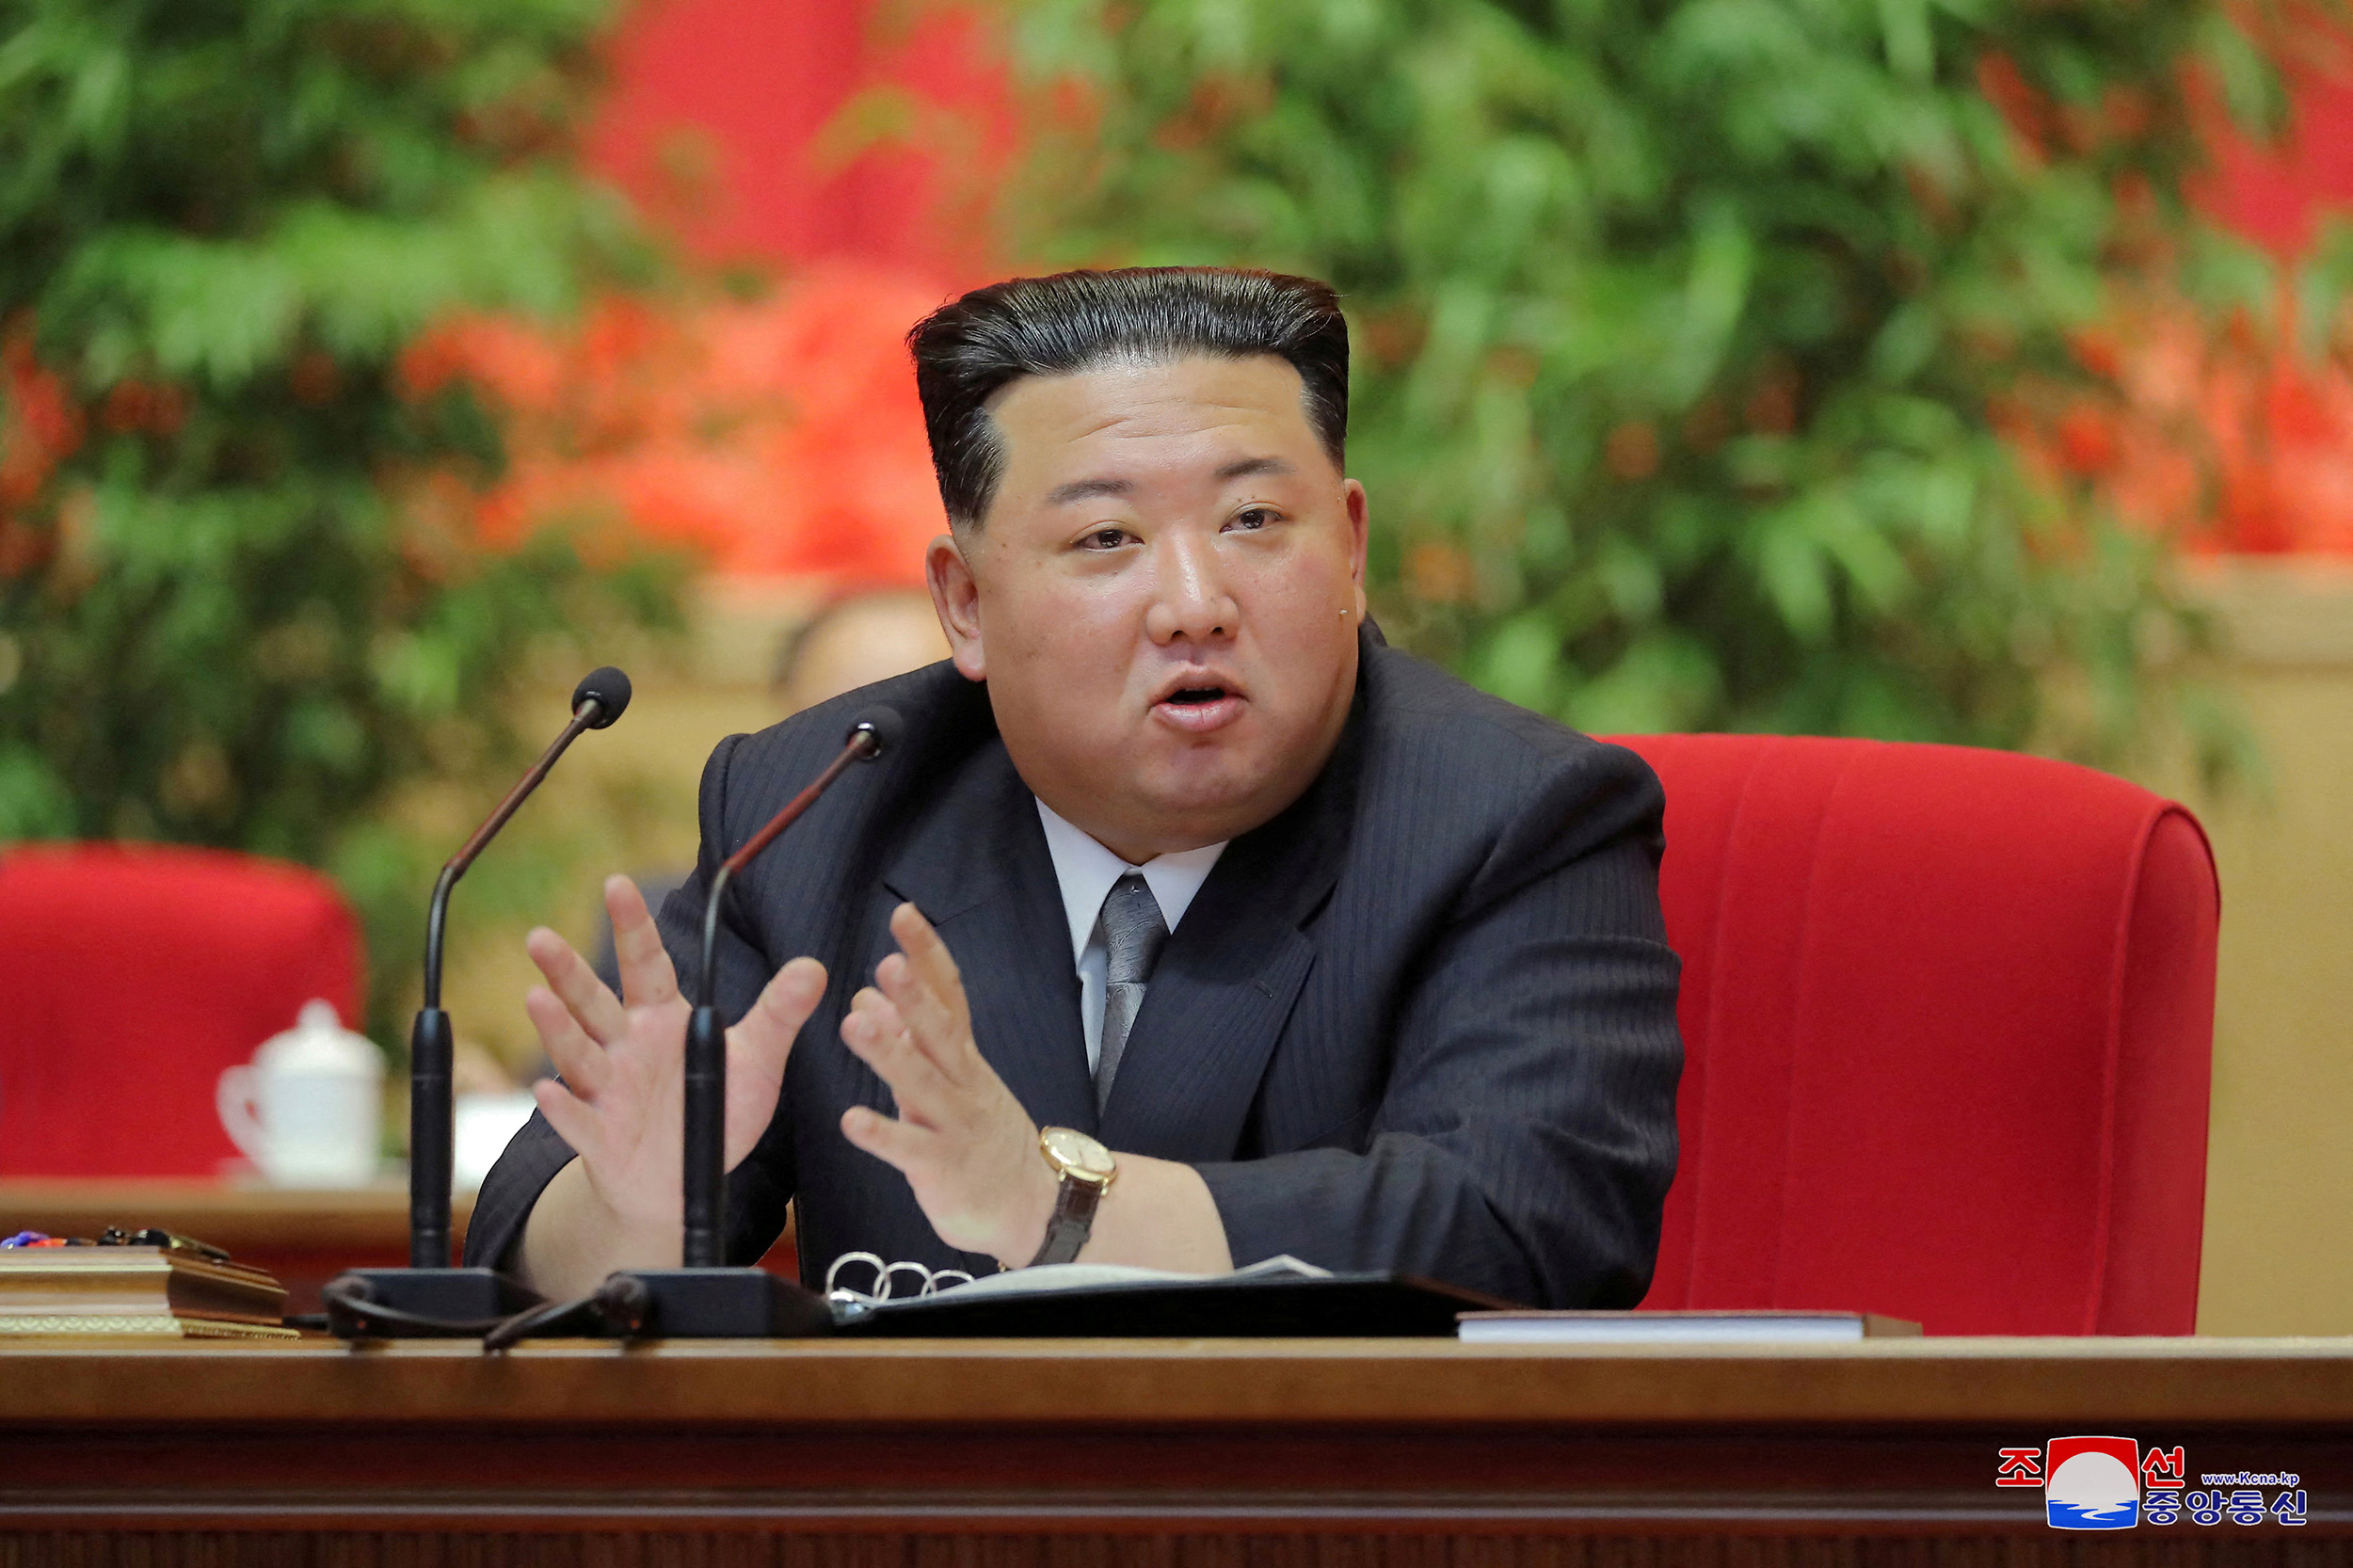 North Korea's leader Kim Jong Un addresses a special workshop for officials of the Workers' Party of Korea (WPK) in Pyongyang, North Korea, in this undated photo released on July 7.